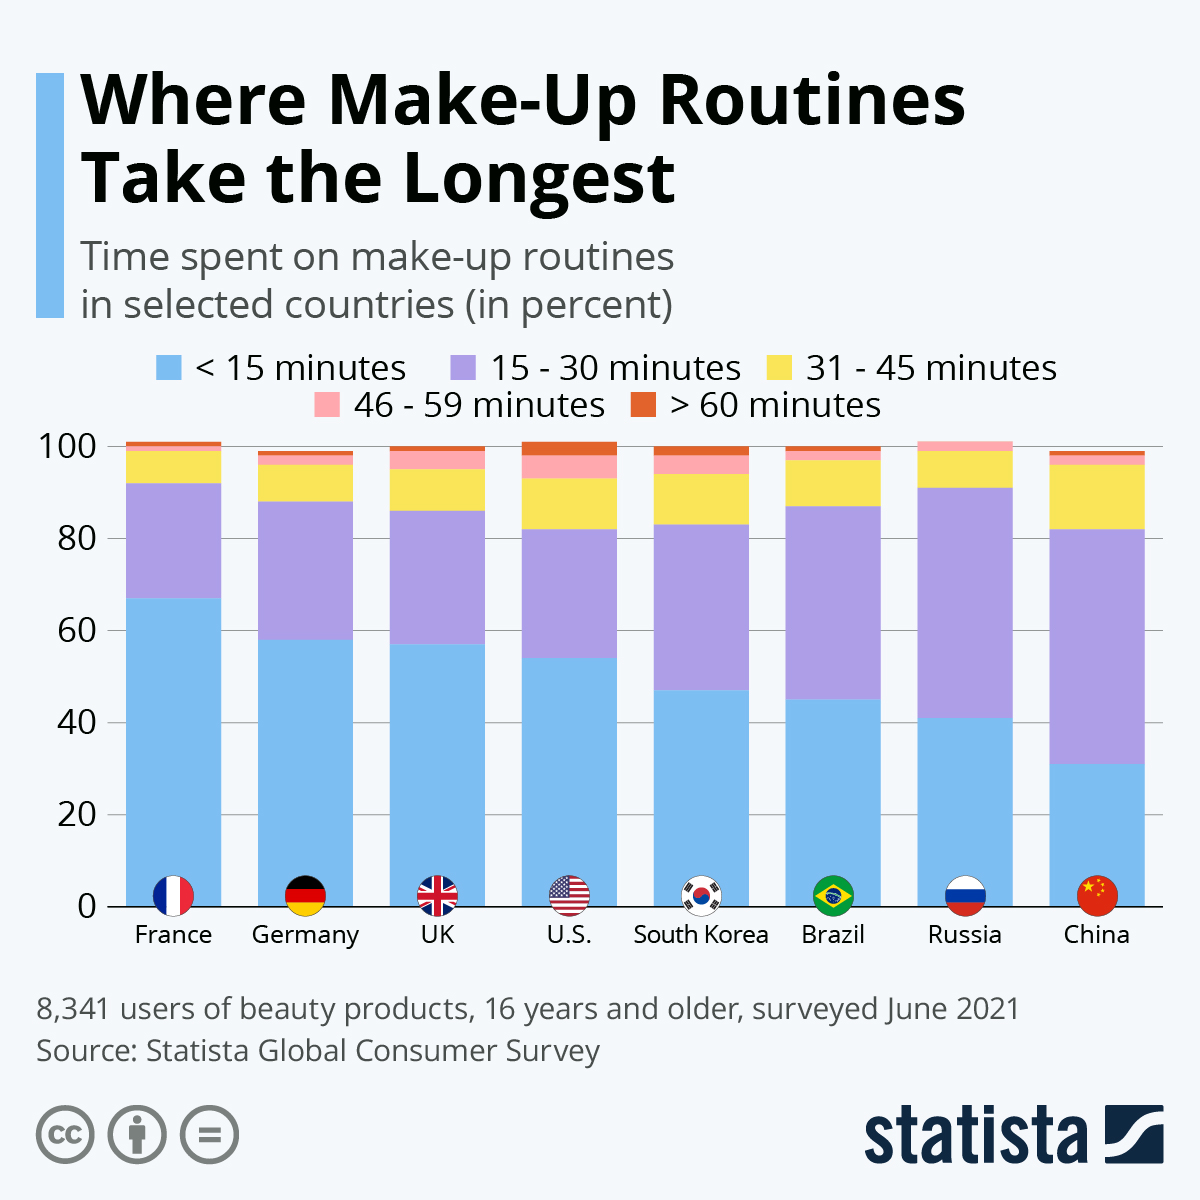 Where Make-Up Routines Take the Longest